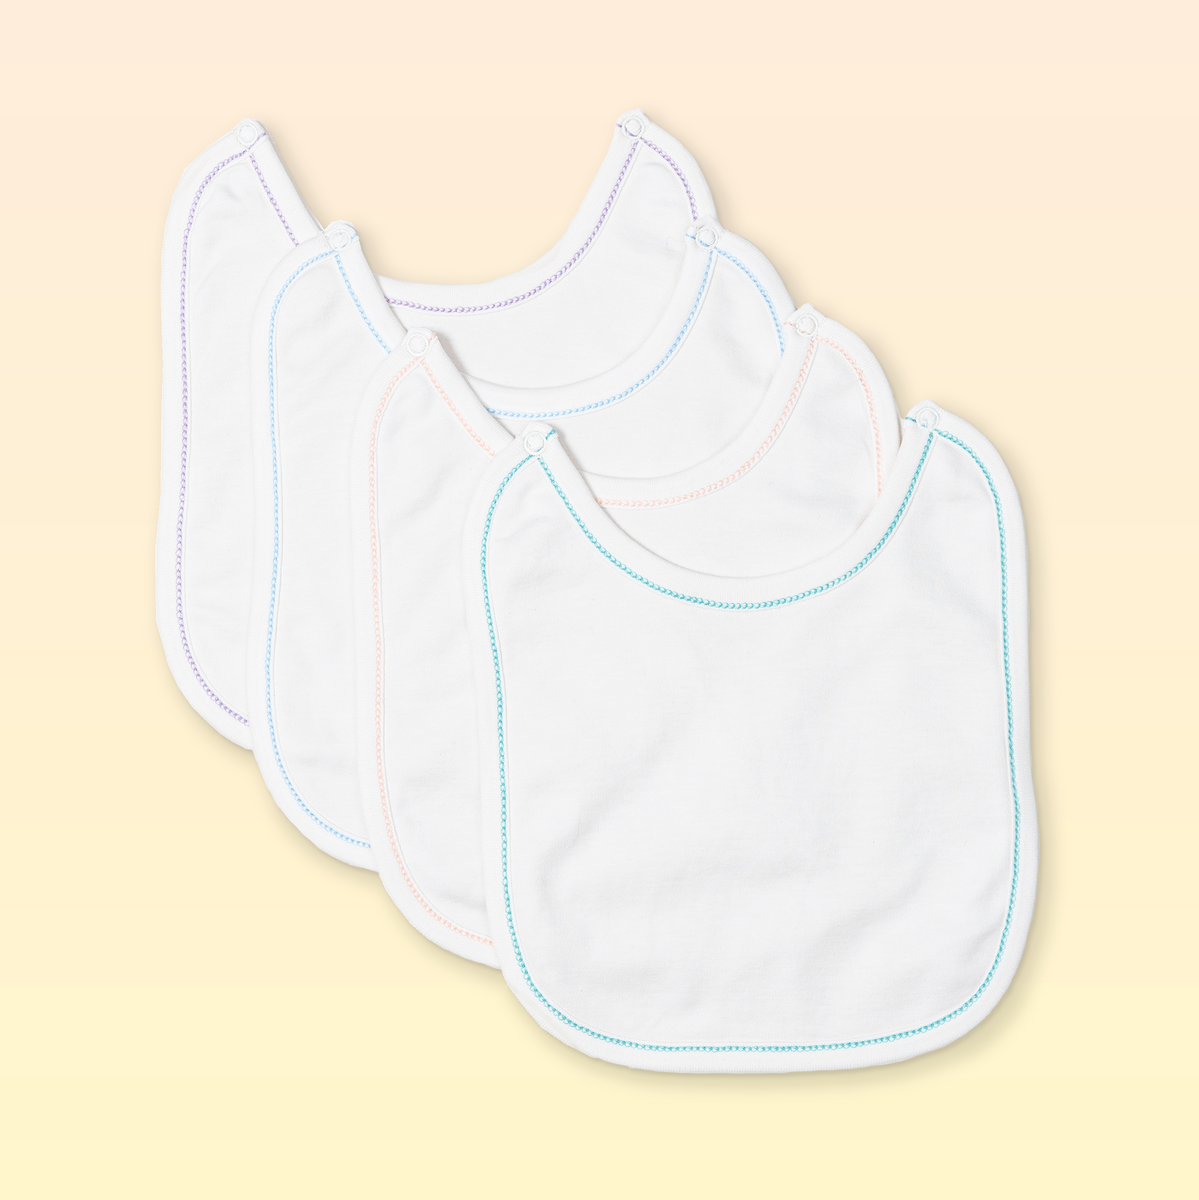 Pack of Bibs - Pack of four bibs in an assortment of colors